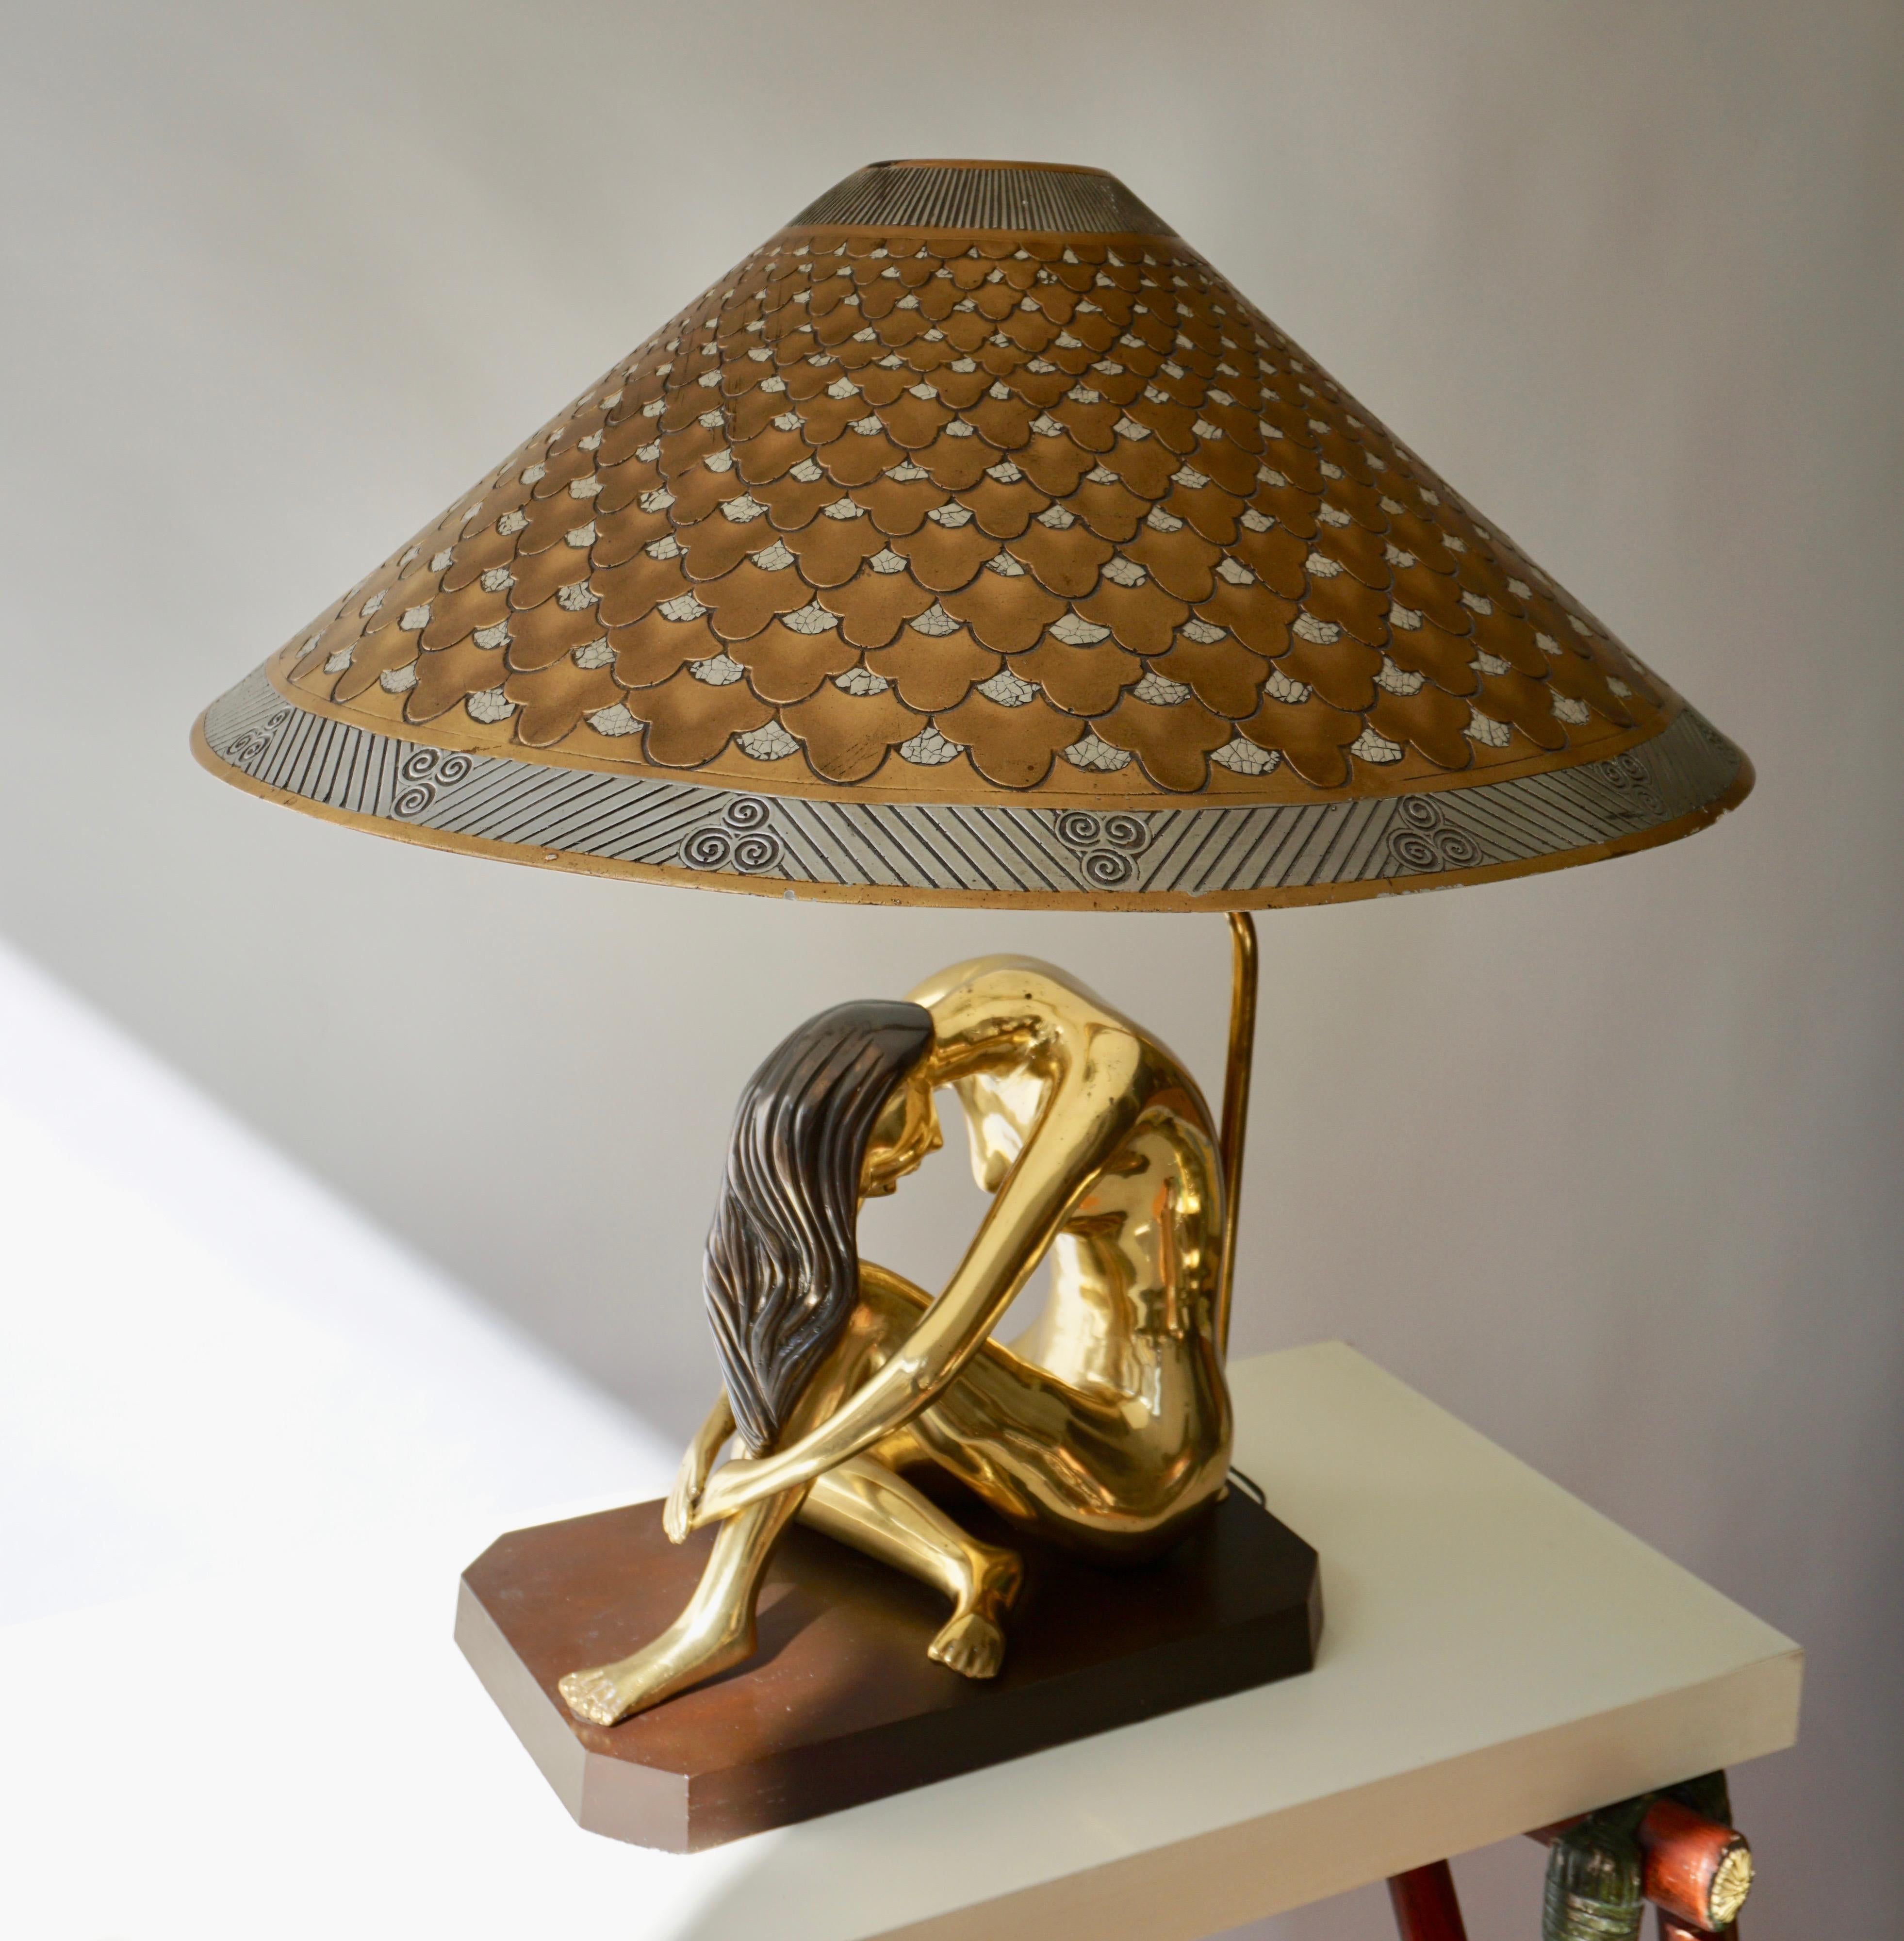 Sculptural table lamp of a bronze nude woman on a wooden base.
The lampshade is made of plaster and straw and is from the 1920s.
Measures: 
Height with shade 72 cm.
Diameter shade 64 cm.
Base 38 cm - 22 cm.